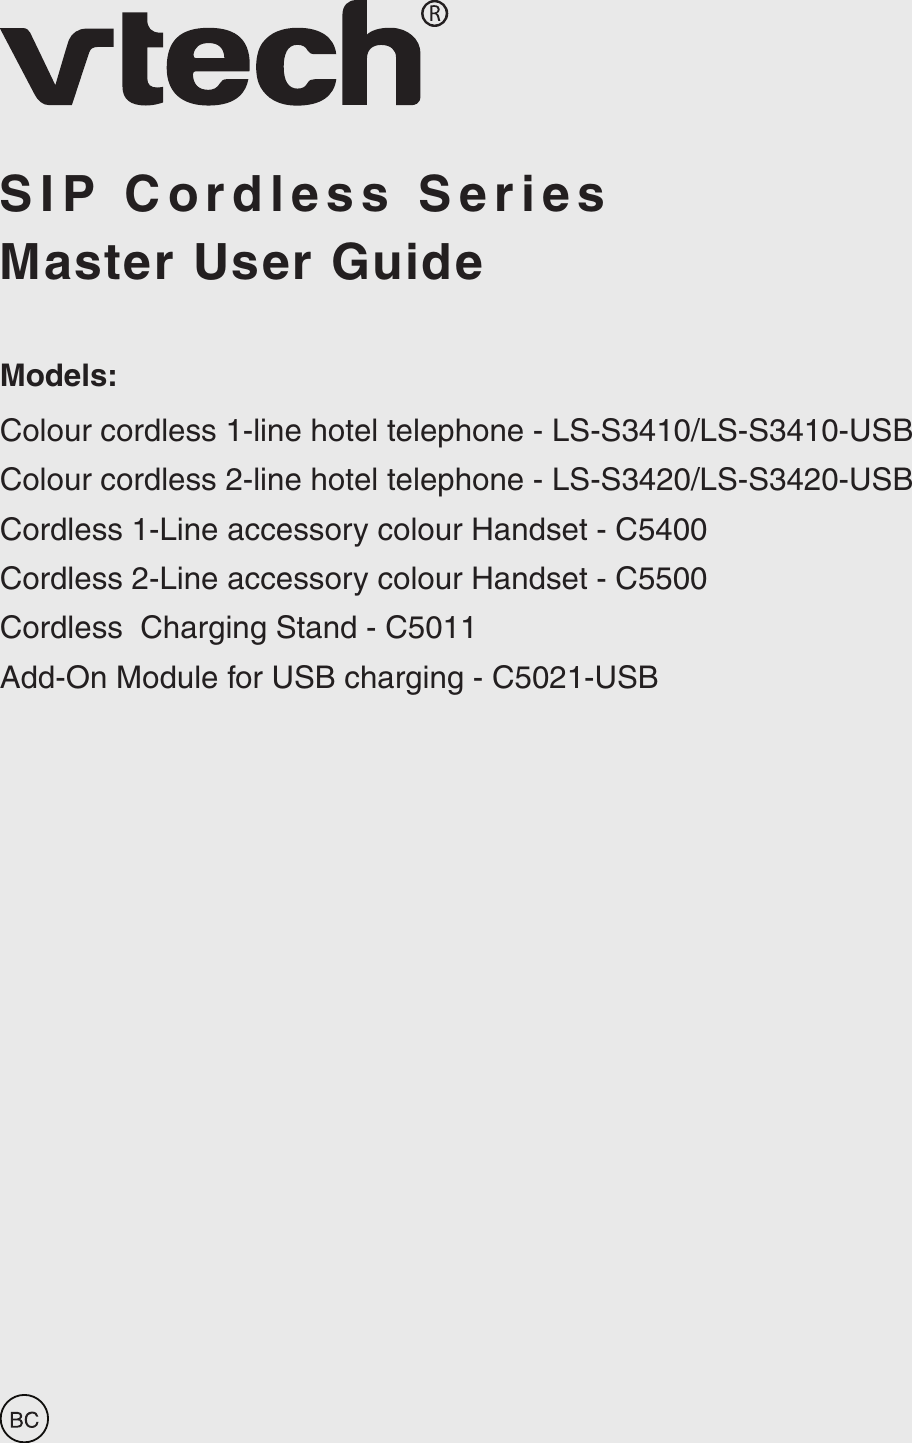 Master User GuideS I P   C o r d l e s s   S e r i e sModels:Colour cordless 1-line hotel telephone - LS-S3410/LS-S3410-USBColour cordless 2-line hotel telephone - LS-S3420/LS-S3420-USBCordless 1-Line accessory colour Handset - C5400Cordless 2-Line accessory colour Handset - C5500Cordless  Charging Stand - C5011Add-On Module for USB charging - C5021-USB